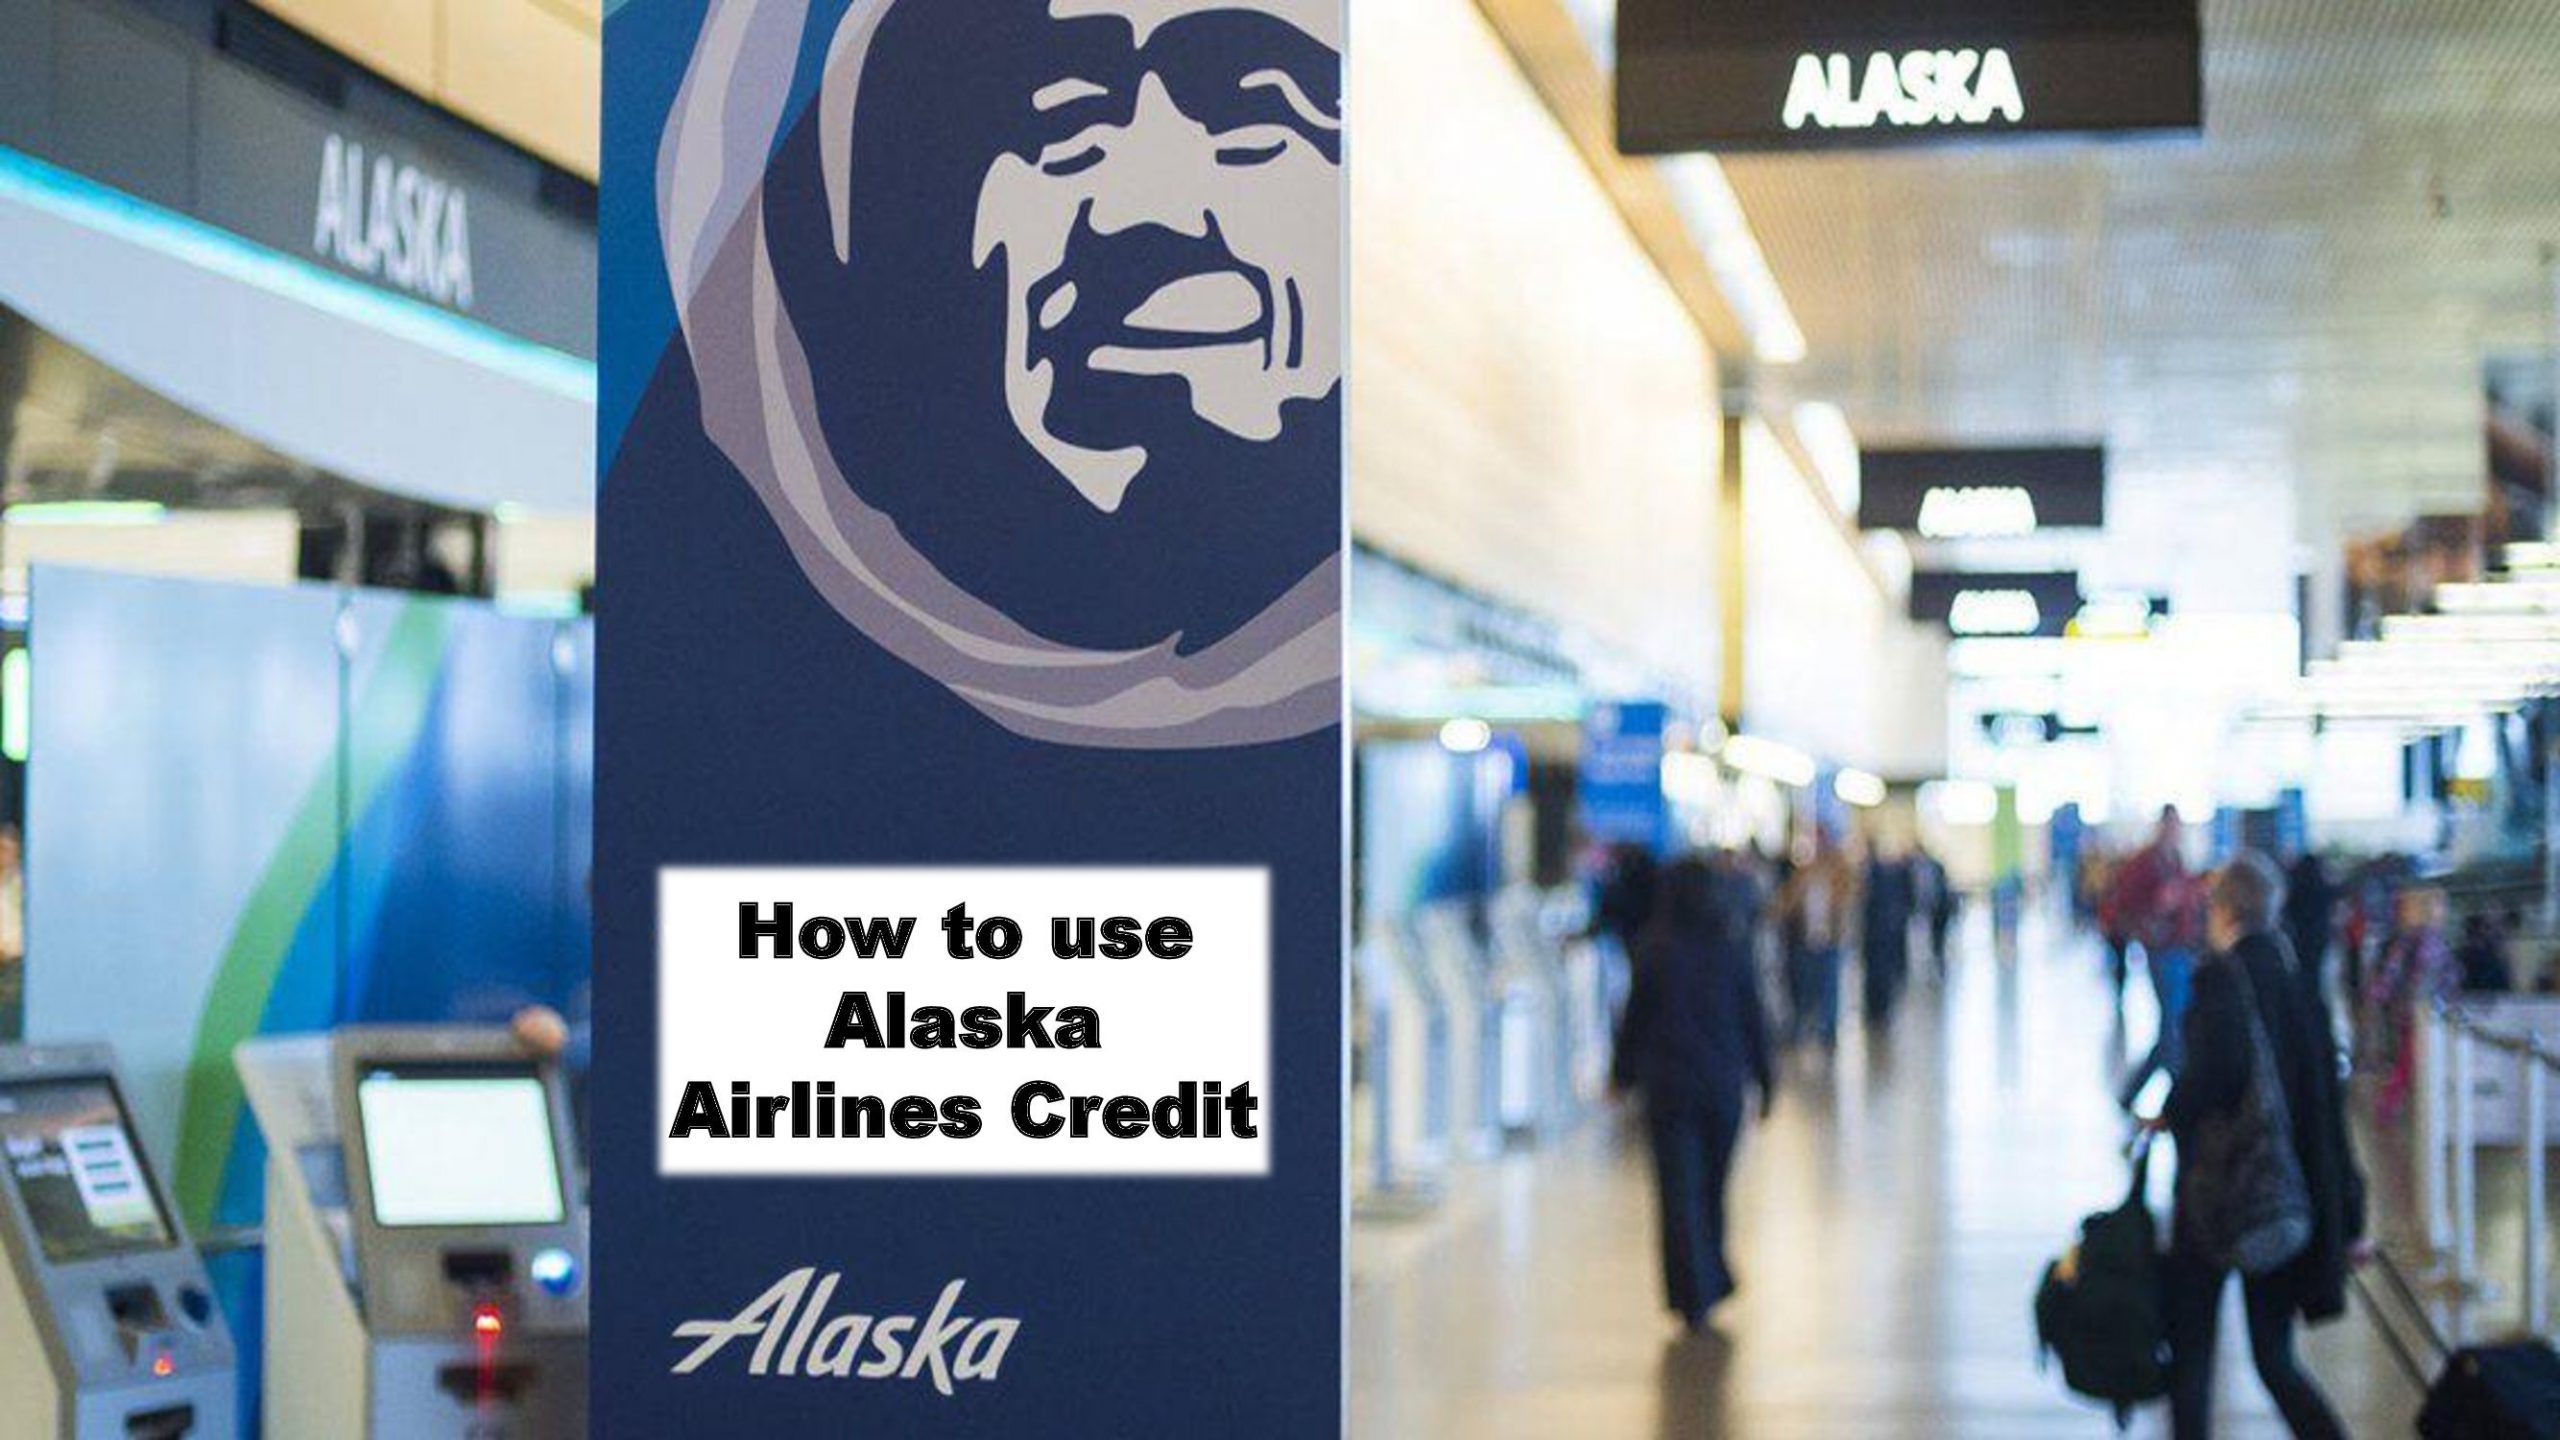 How to use Alaska airlines credit?